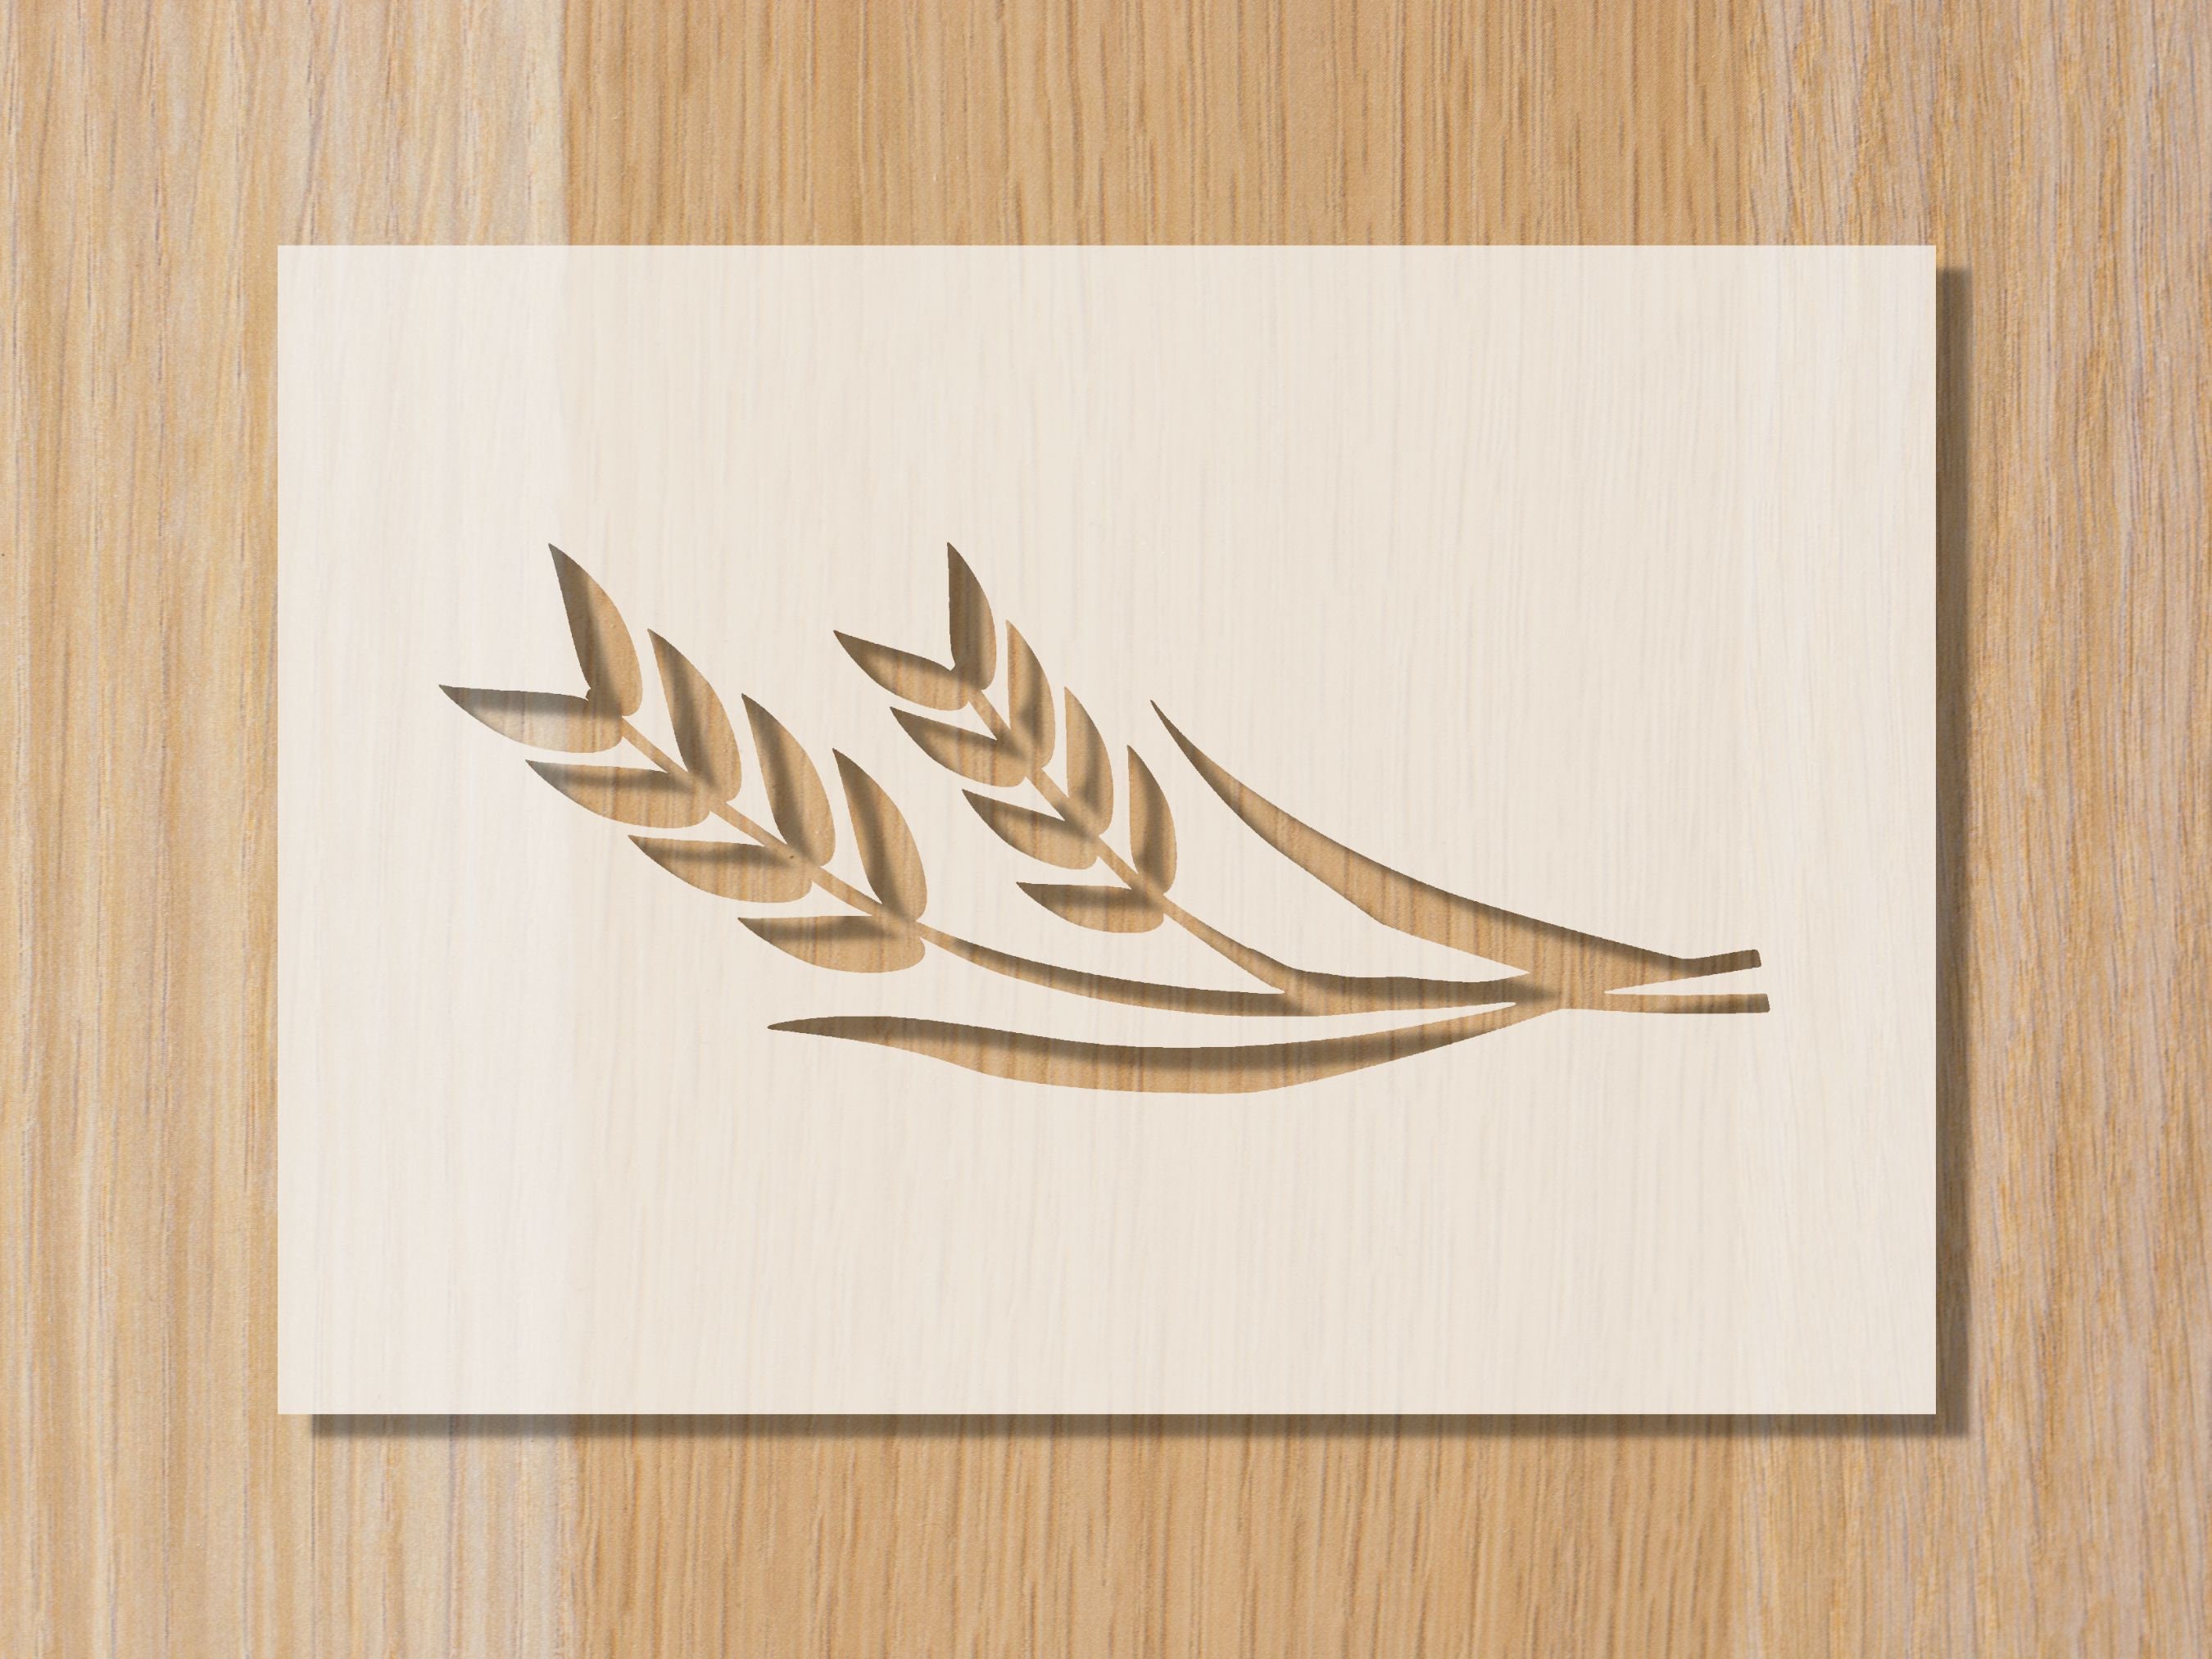 Sourdough Bread Stencil Wheat Stalk Baking Stencil Bread Decoration  Sourdough Stencil Suitable for Bread Cakes and Cookies Baking Gift 